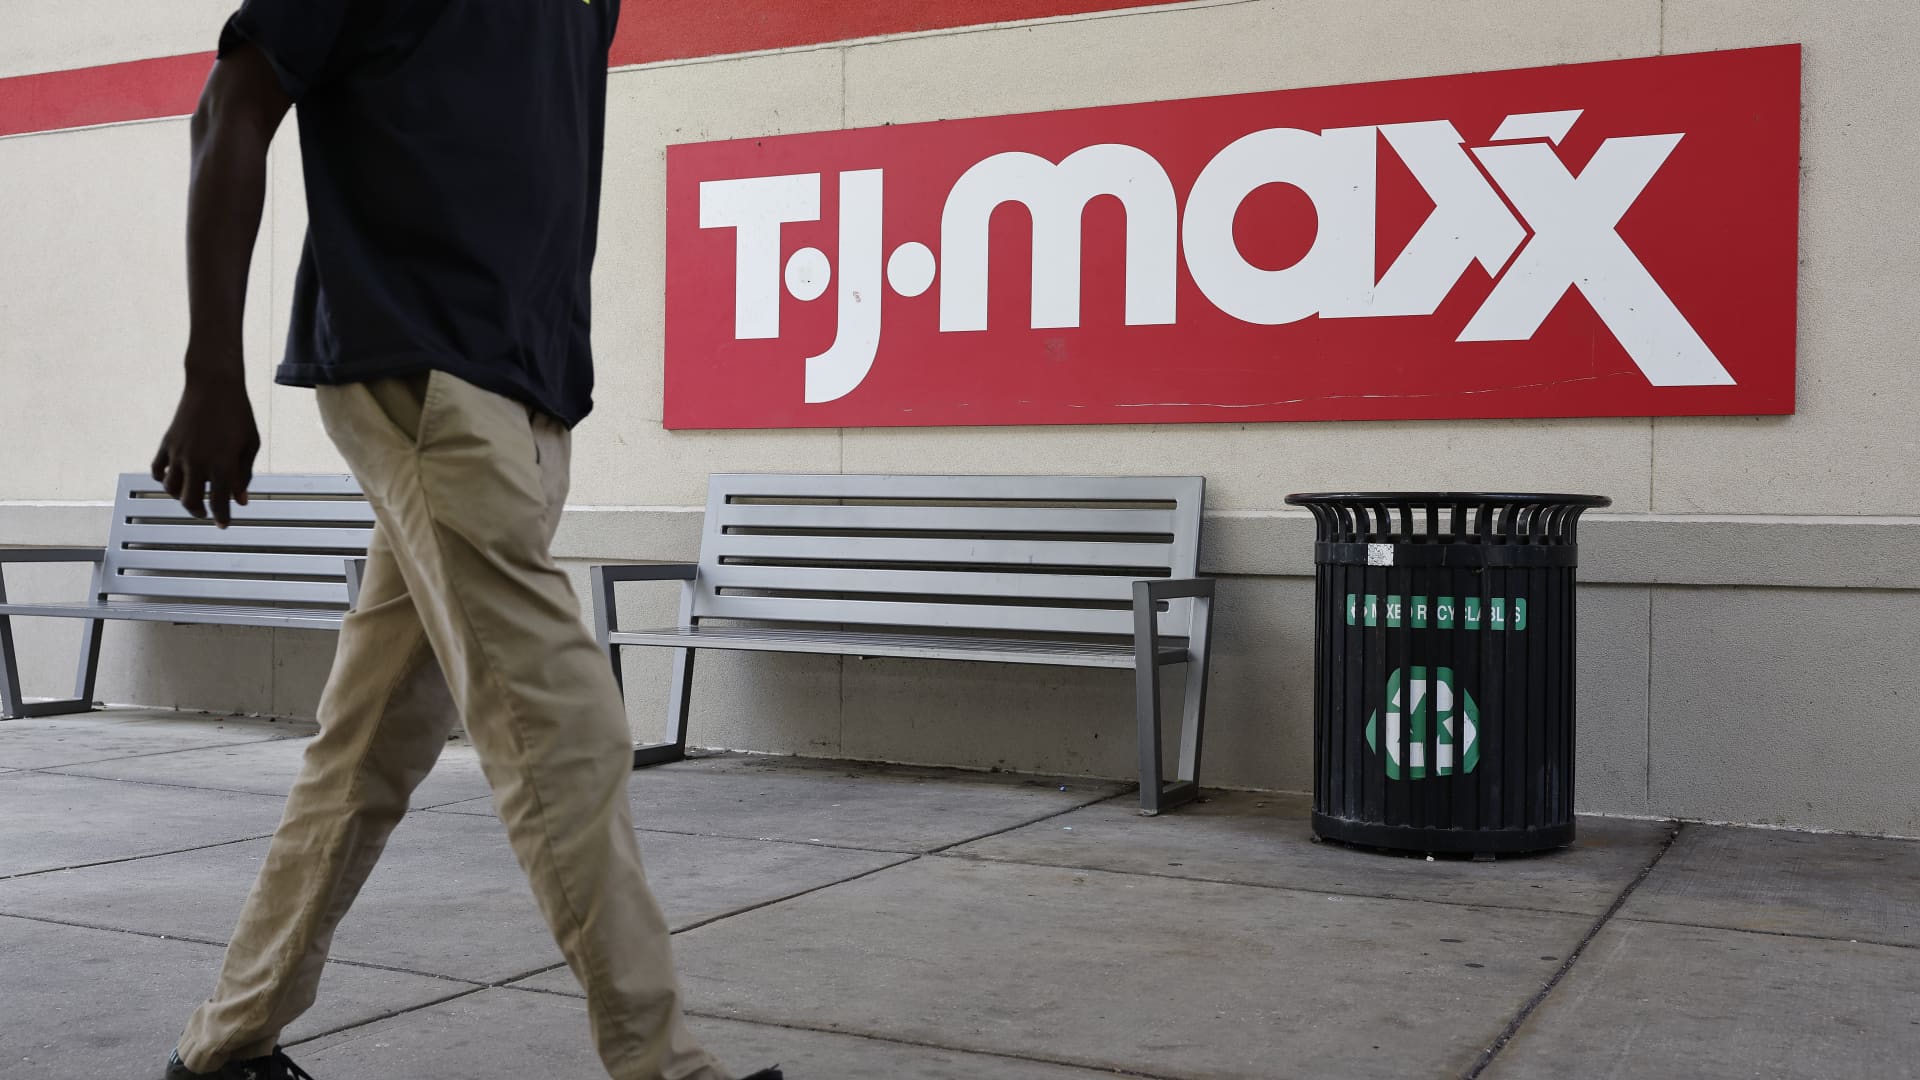 Shoppers come and go the TJ Maxx store at the Mall at Prince George's on August 17, 2022 in Hyattsville, Maryland.